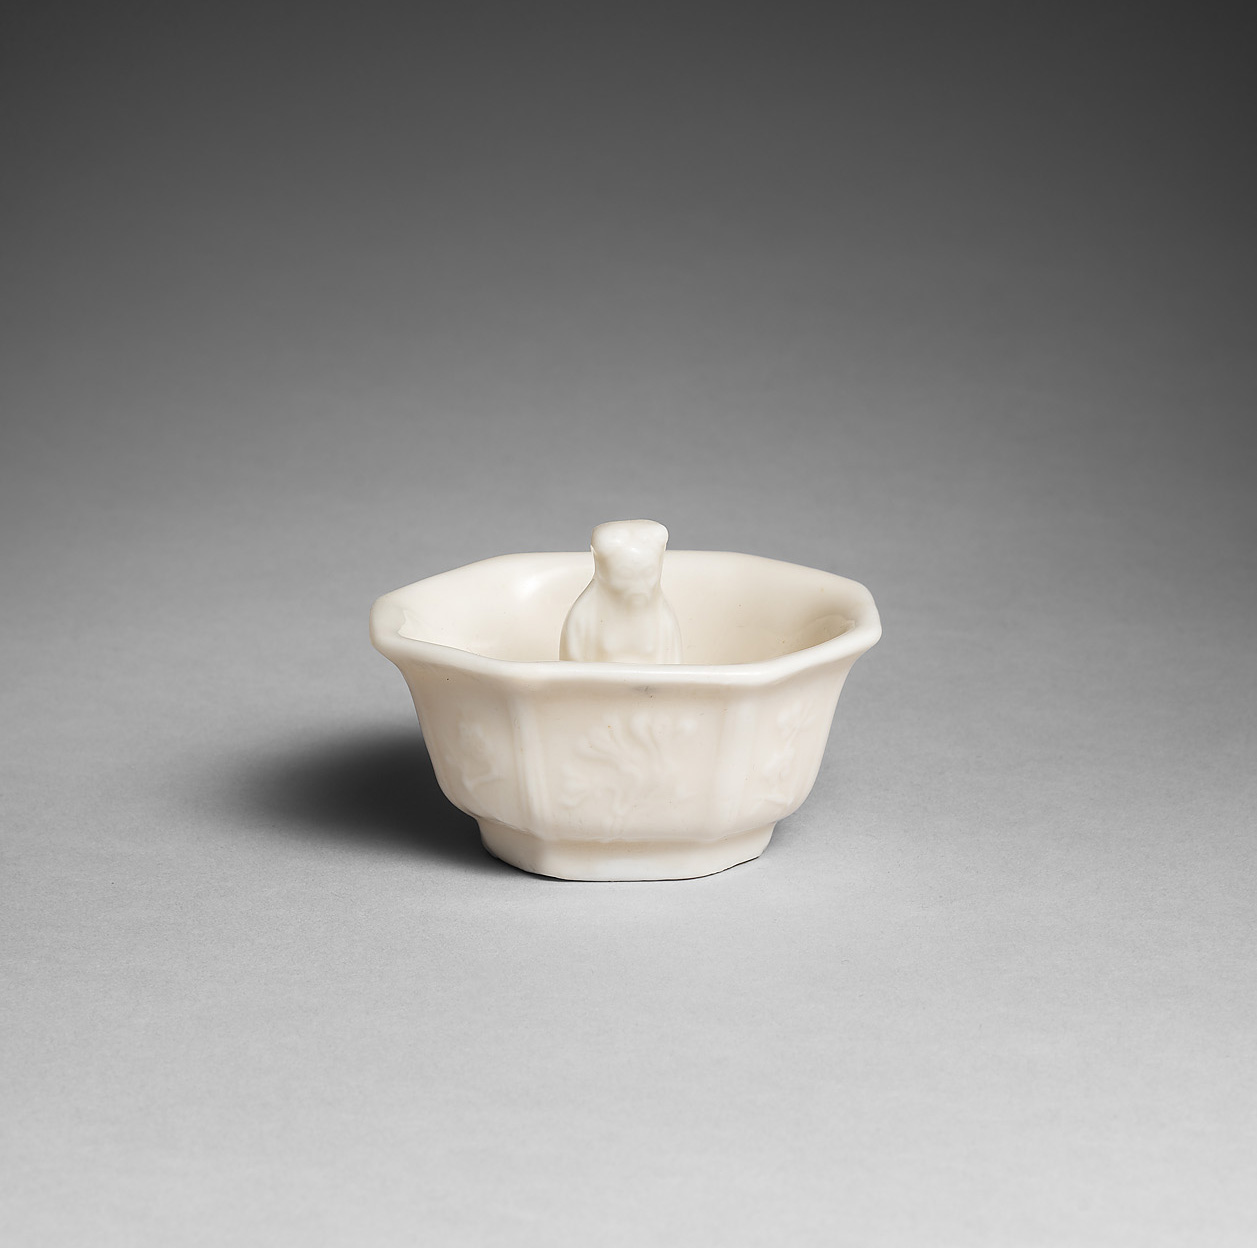 Porcelain Late Ming dynasty (1368-1644), ca. 1640, China